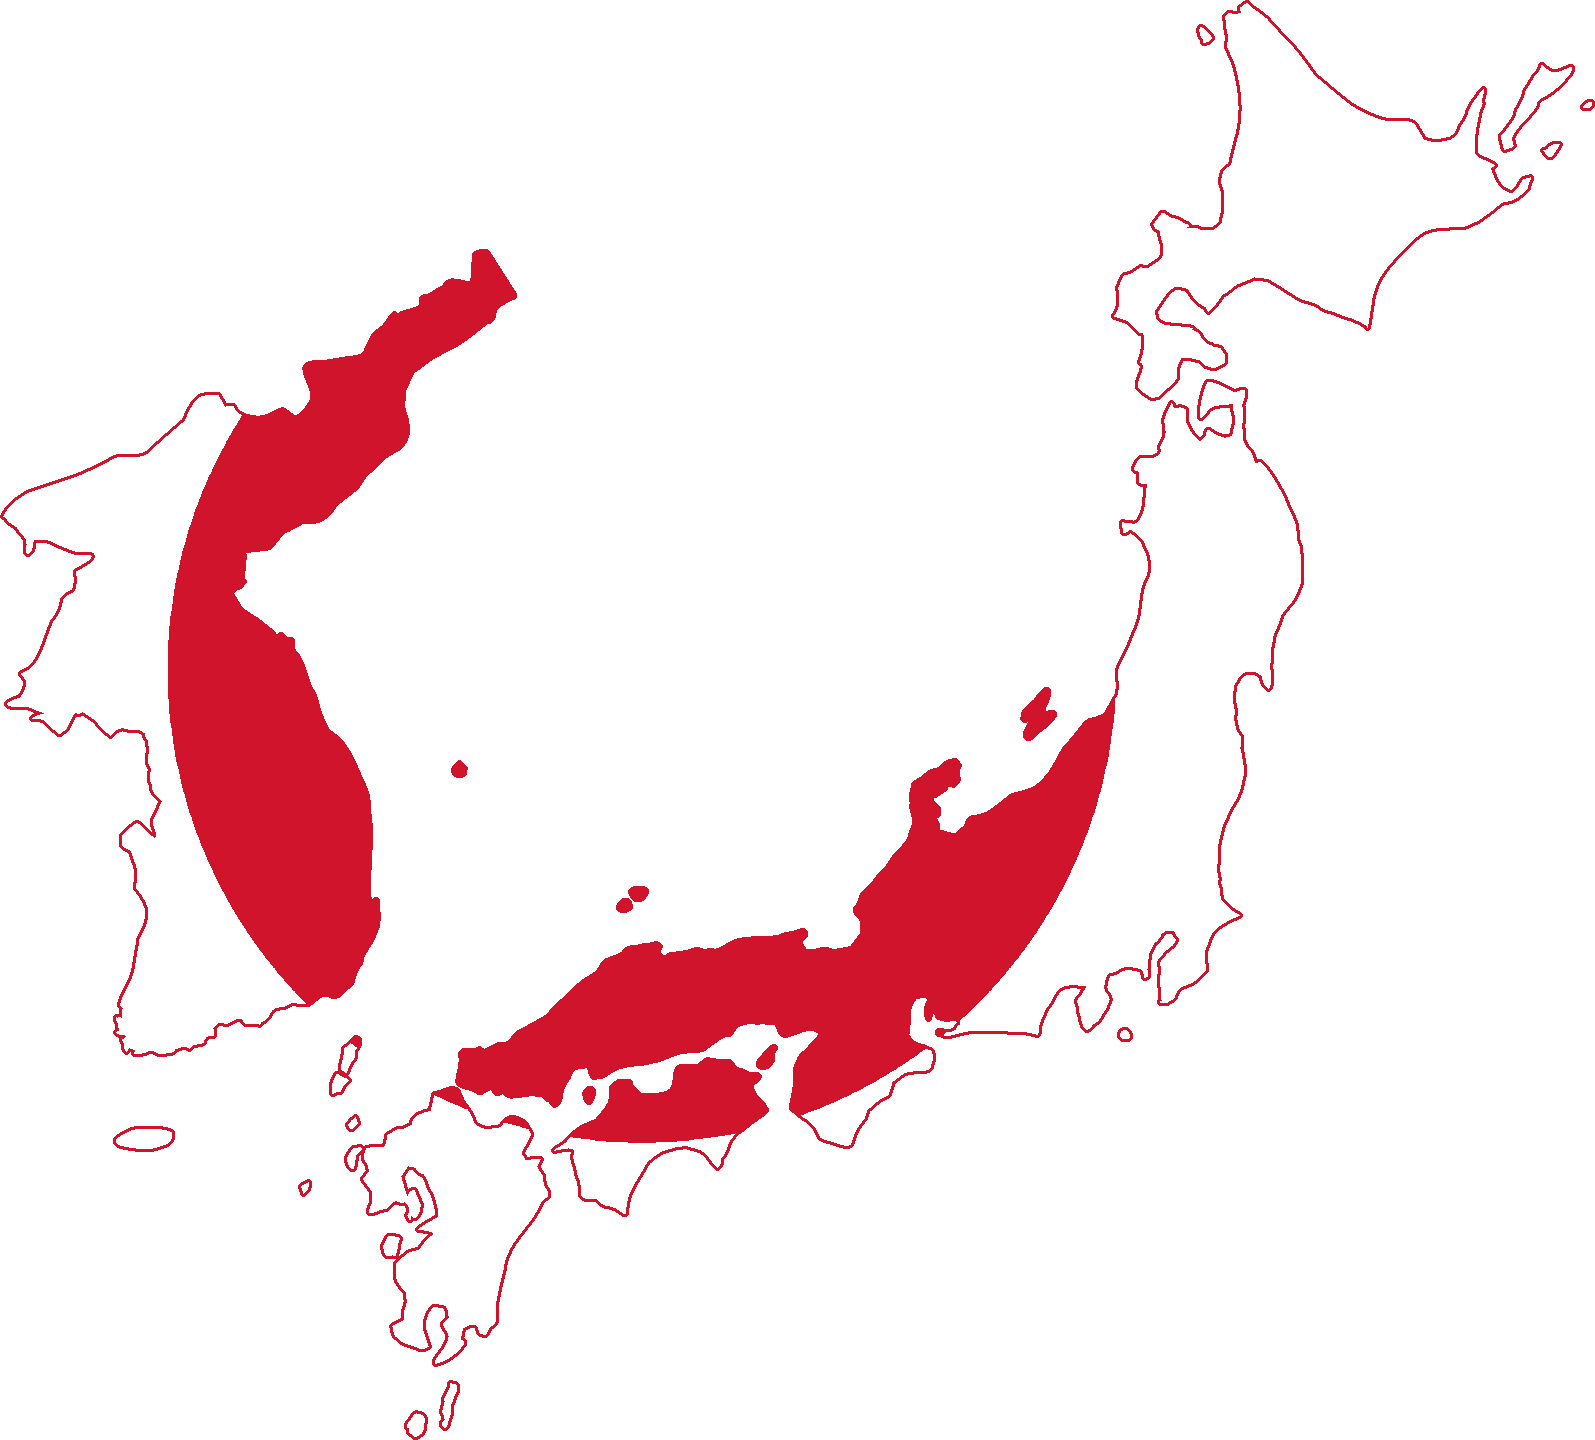 Flag Map Of Japan And Korea - Japanese Empire Flag Map (1595x1440)